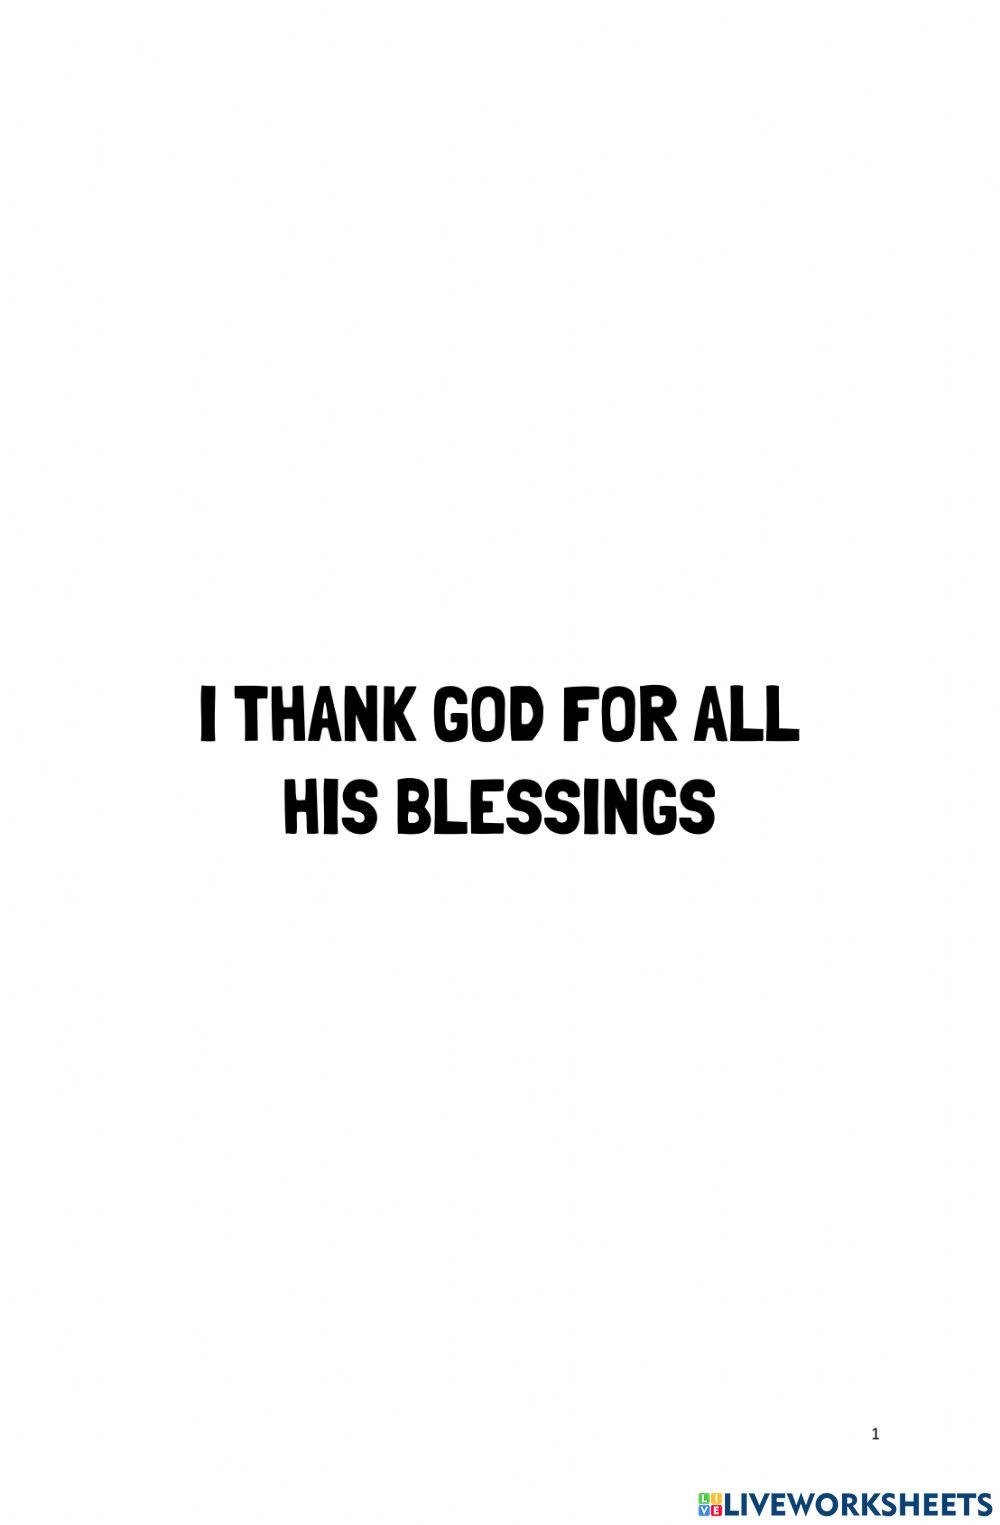 Q3W2-Lesson 16 - I Thank God for All His Blessings - ODL